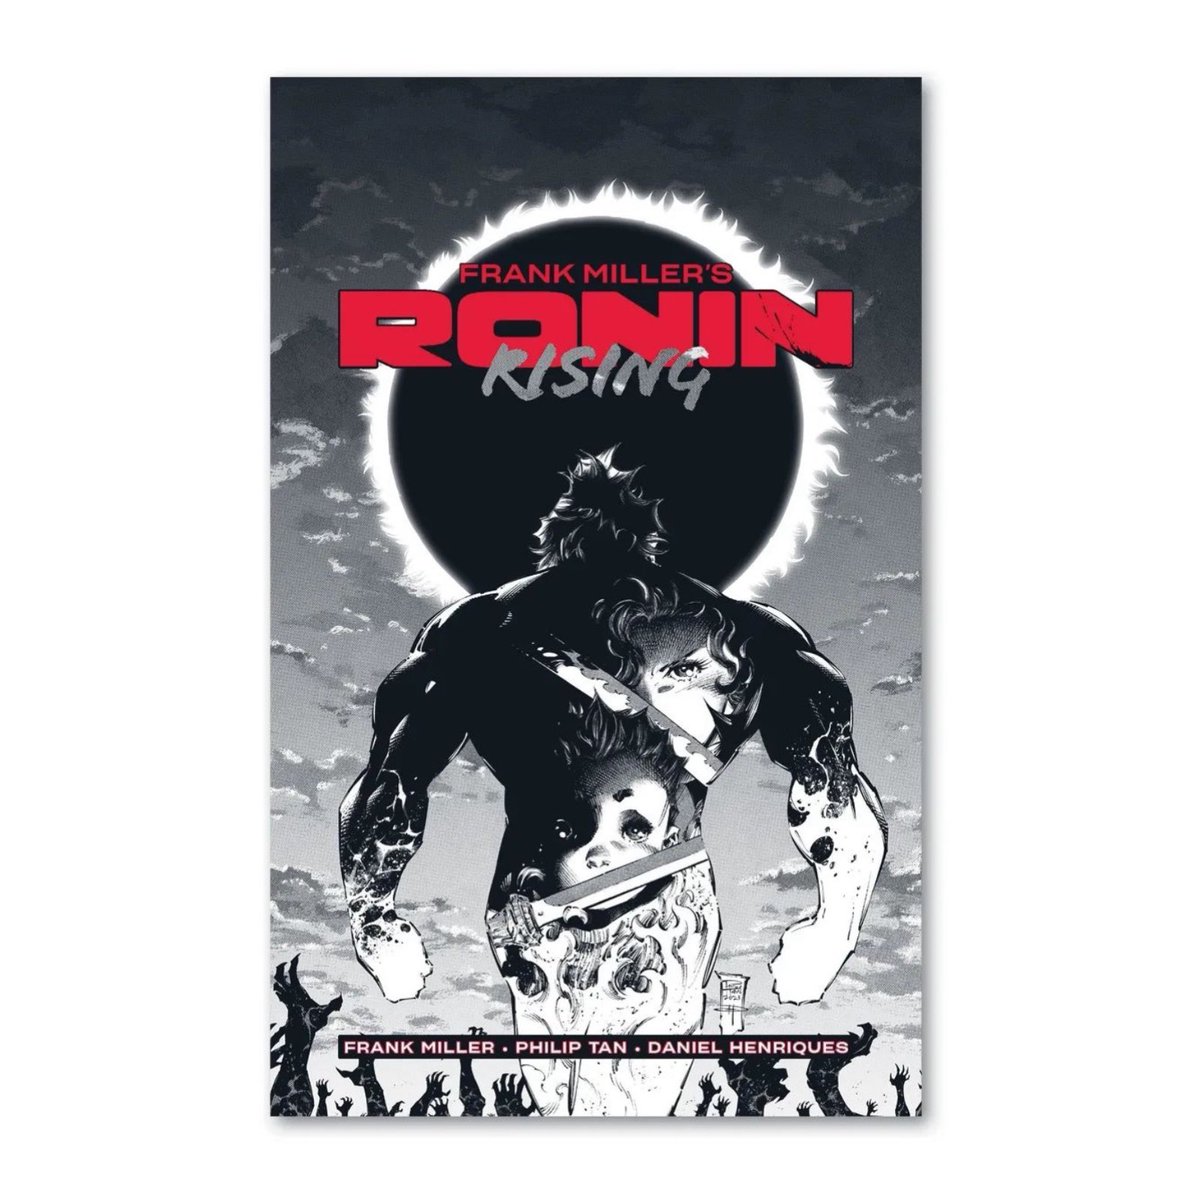 Get ready for RONIN RISING, the collected edition from RONIN BOOK II coming out from @FMPComics and @ABRAMSbooks . RONIN RISING will be available in two formats, a collector’s edition and a manga edition.👊🤘 @FrankMillerInk + @PhilipTanArt + @DHenriquesInks #roninrising